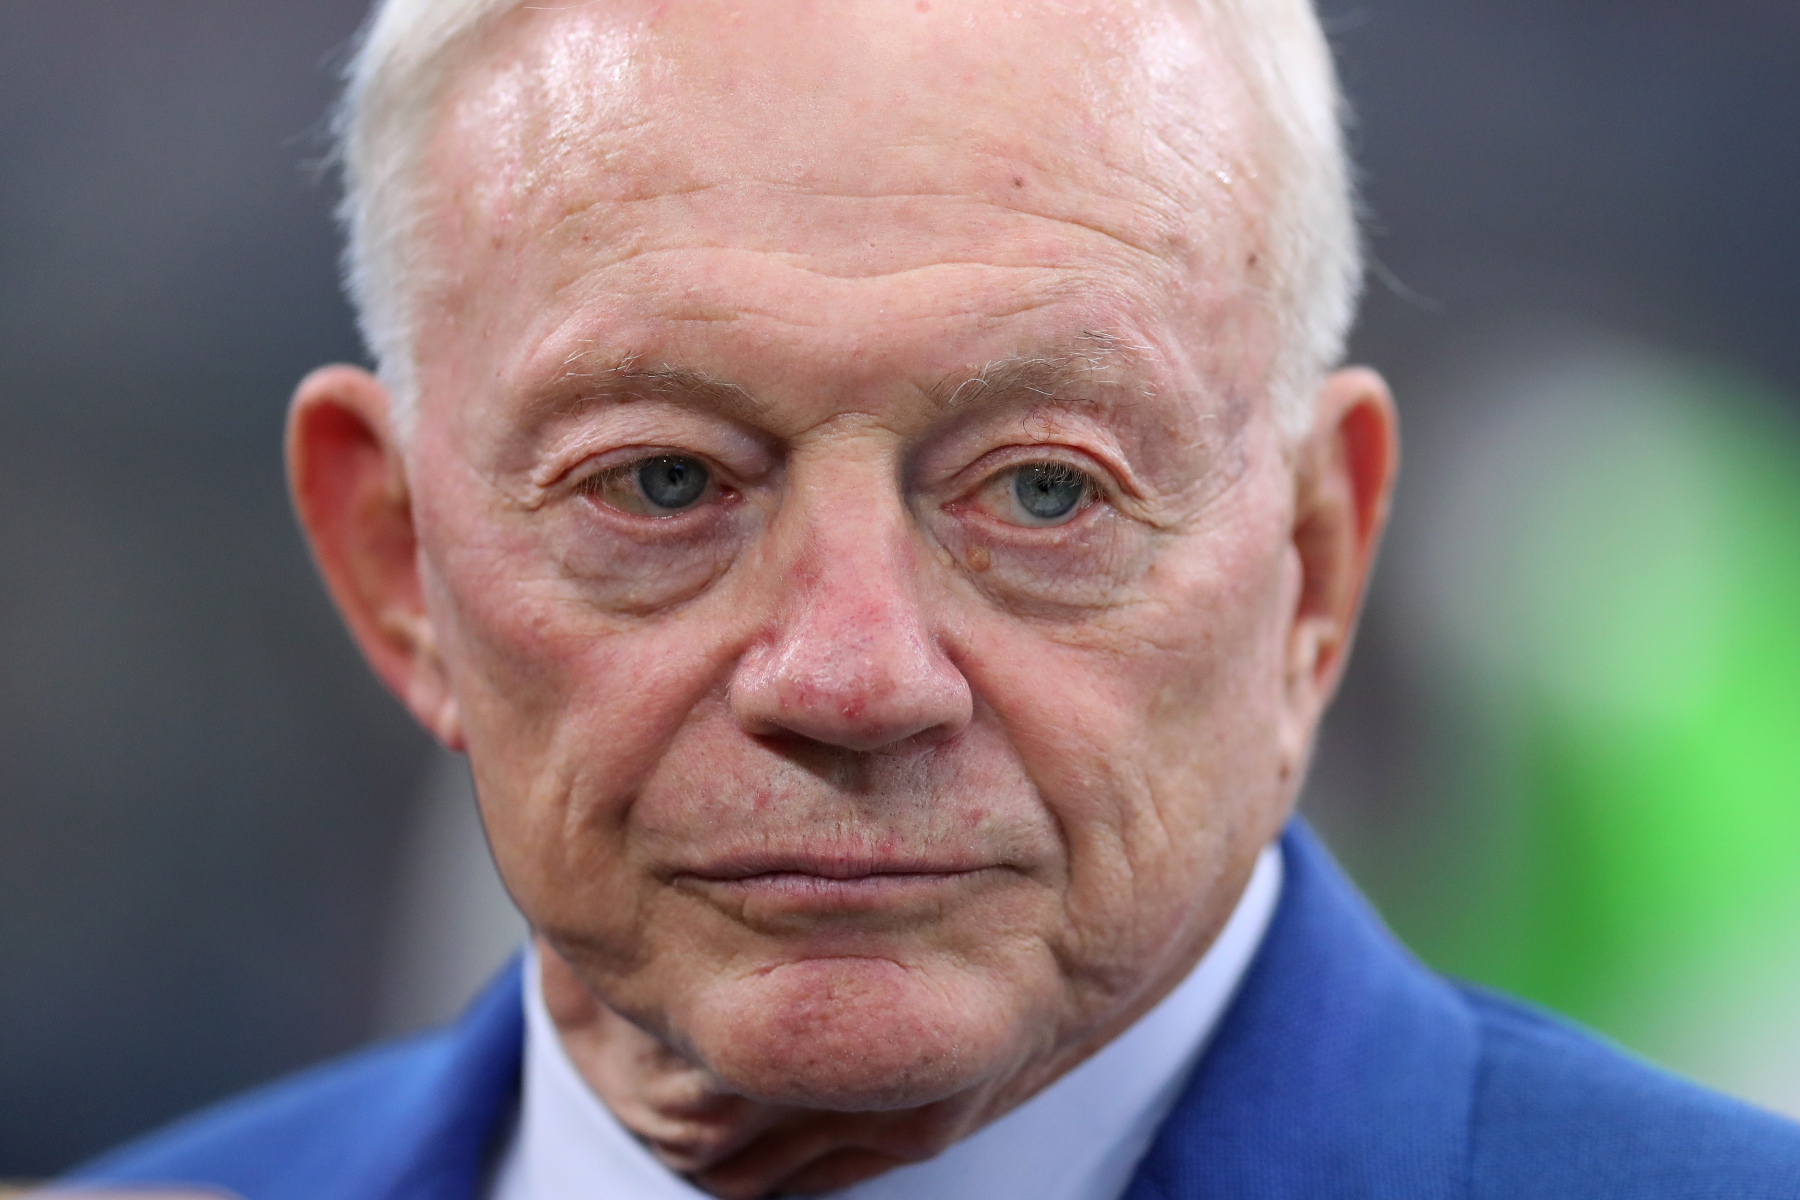 Dallas Cowboys owner Jerry Jones has been oddly quiet about social injustice since the killing of George Floyd. Could his silence end soon?